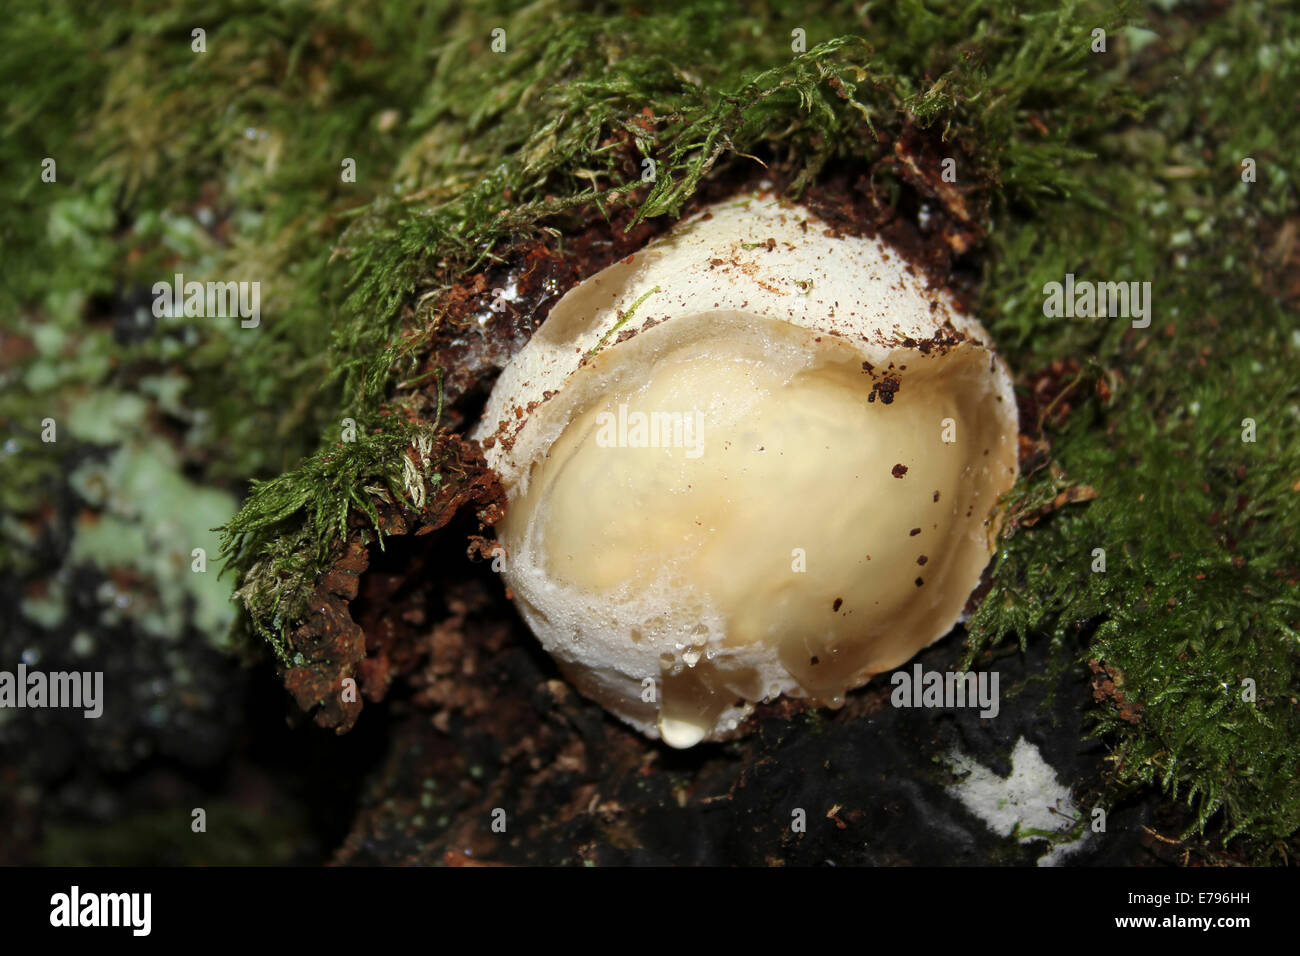 A Slime Mould Called 'False Puffball' Enteridium lycoperdon In Its Sporangial or Aethalial phase Stock Photo